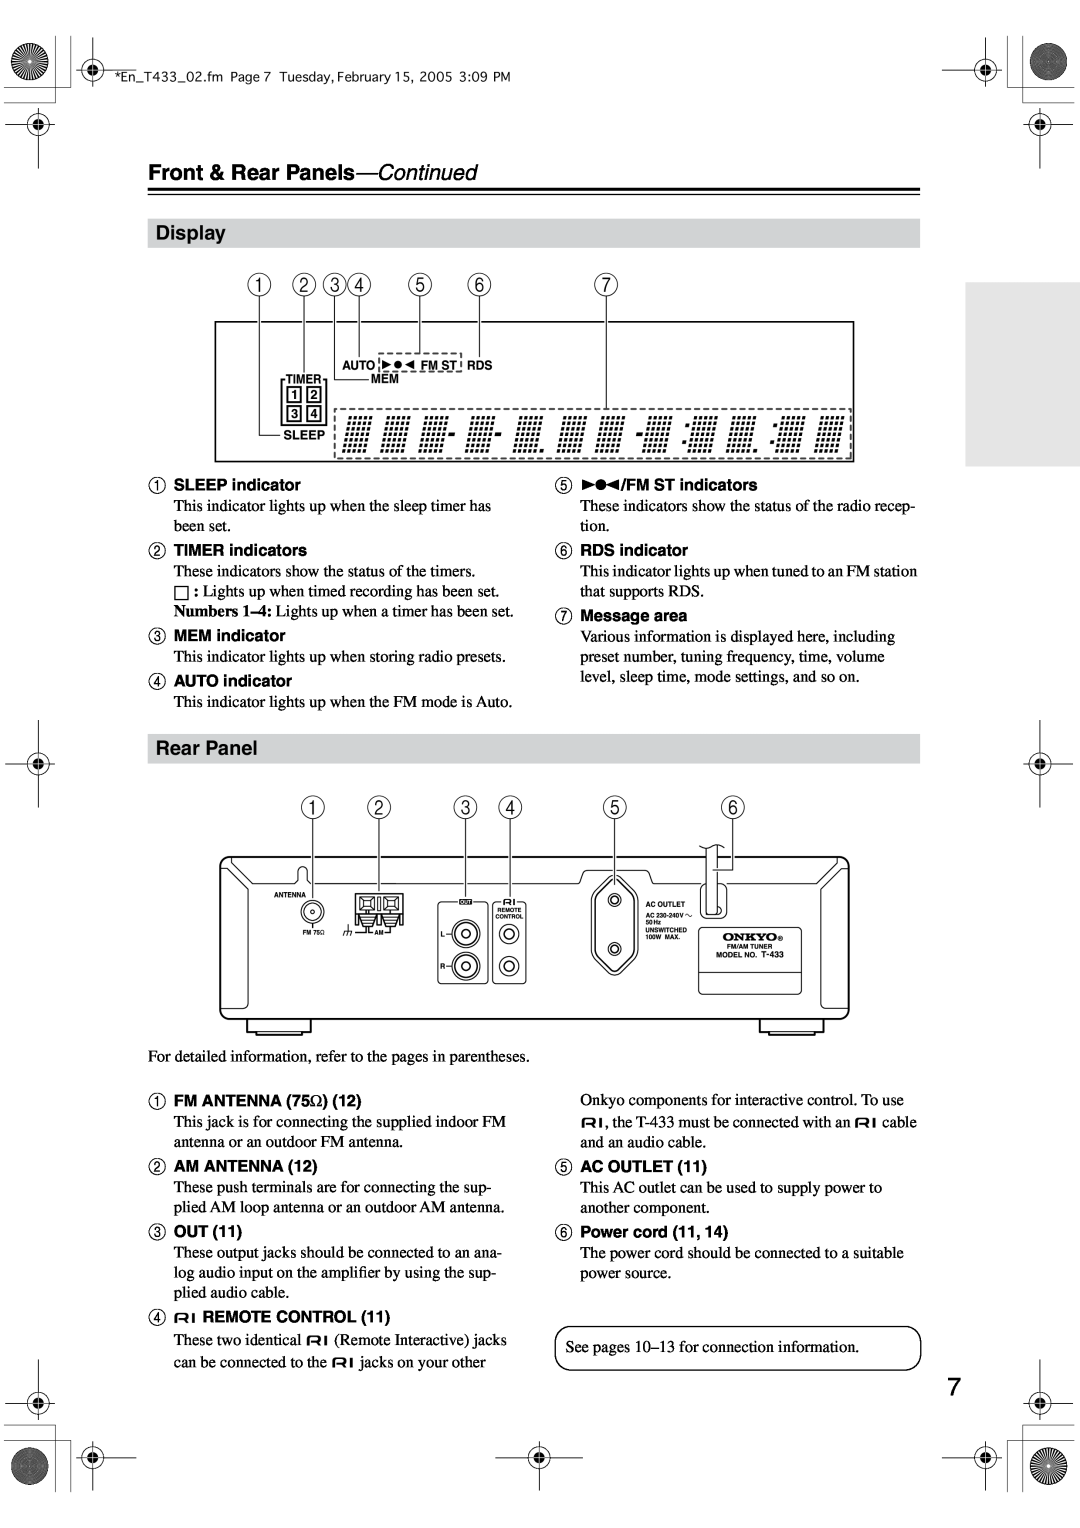 Onkyo T-433 instruction manual Front & Rear Panels-Continued, Display 